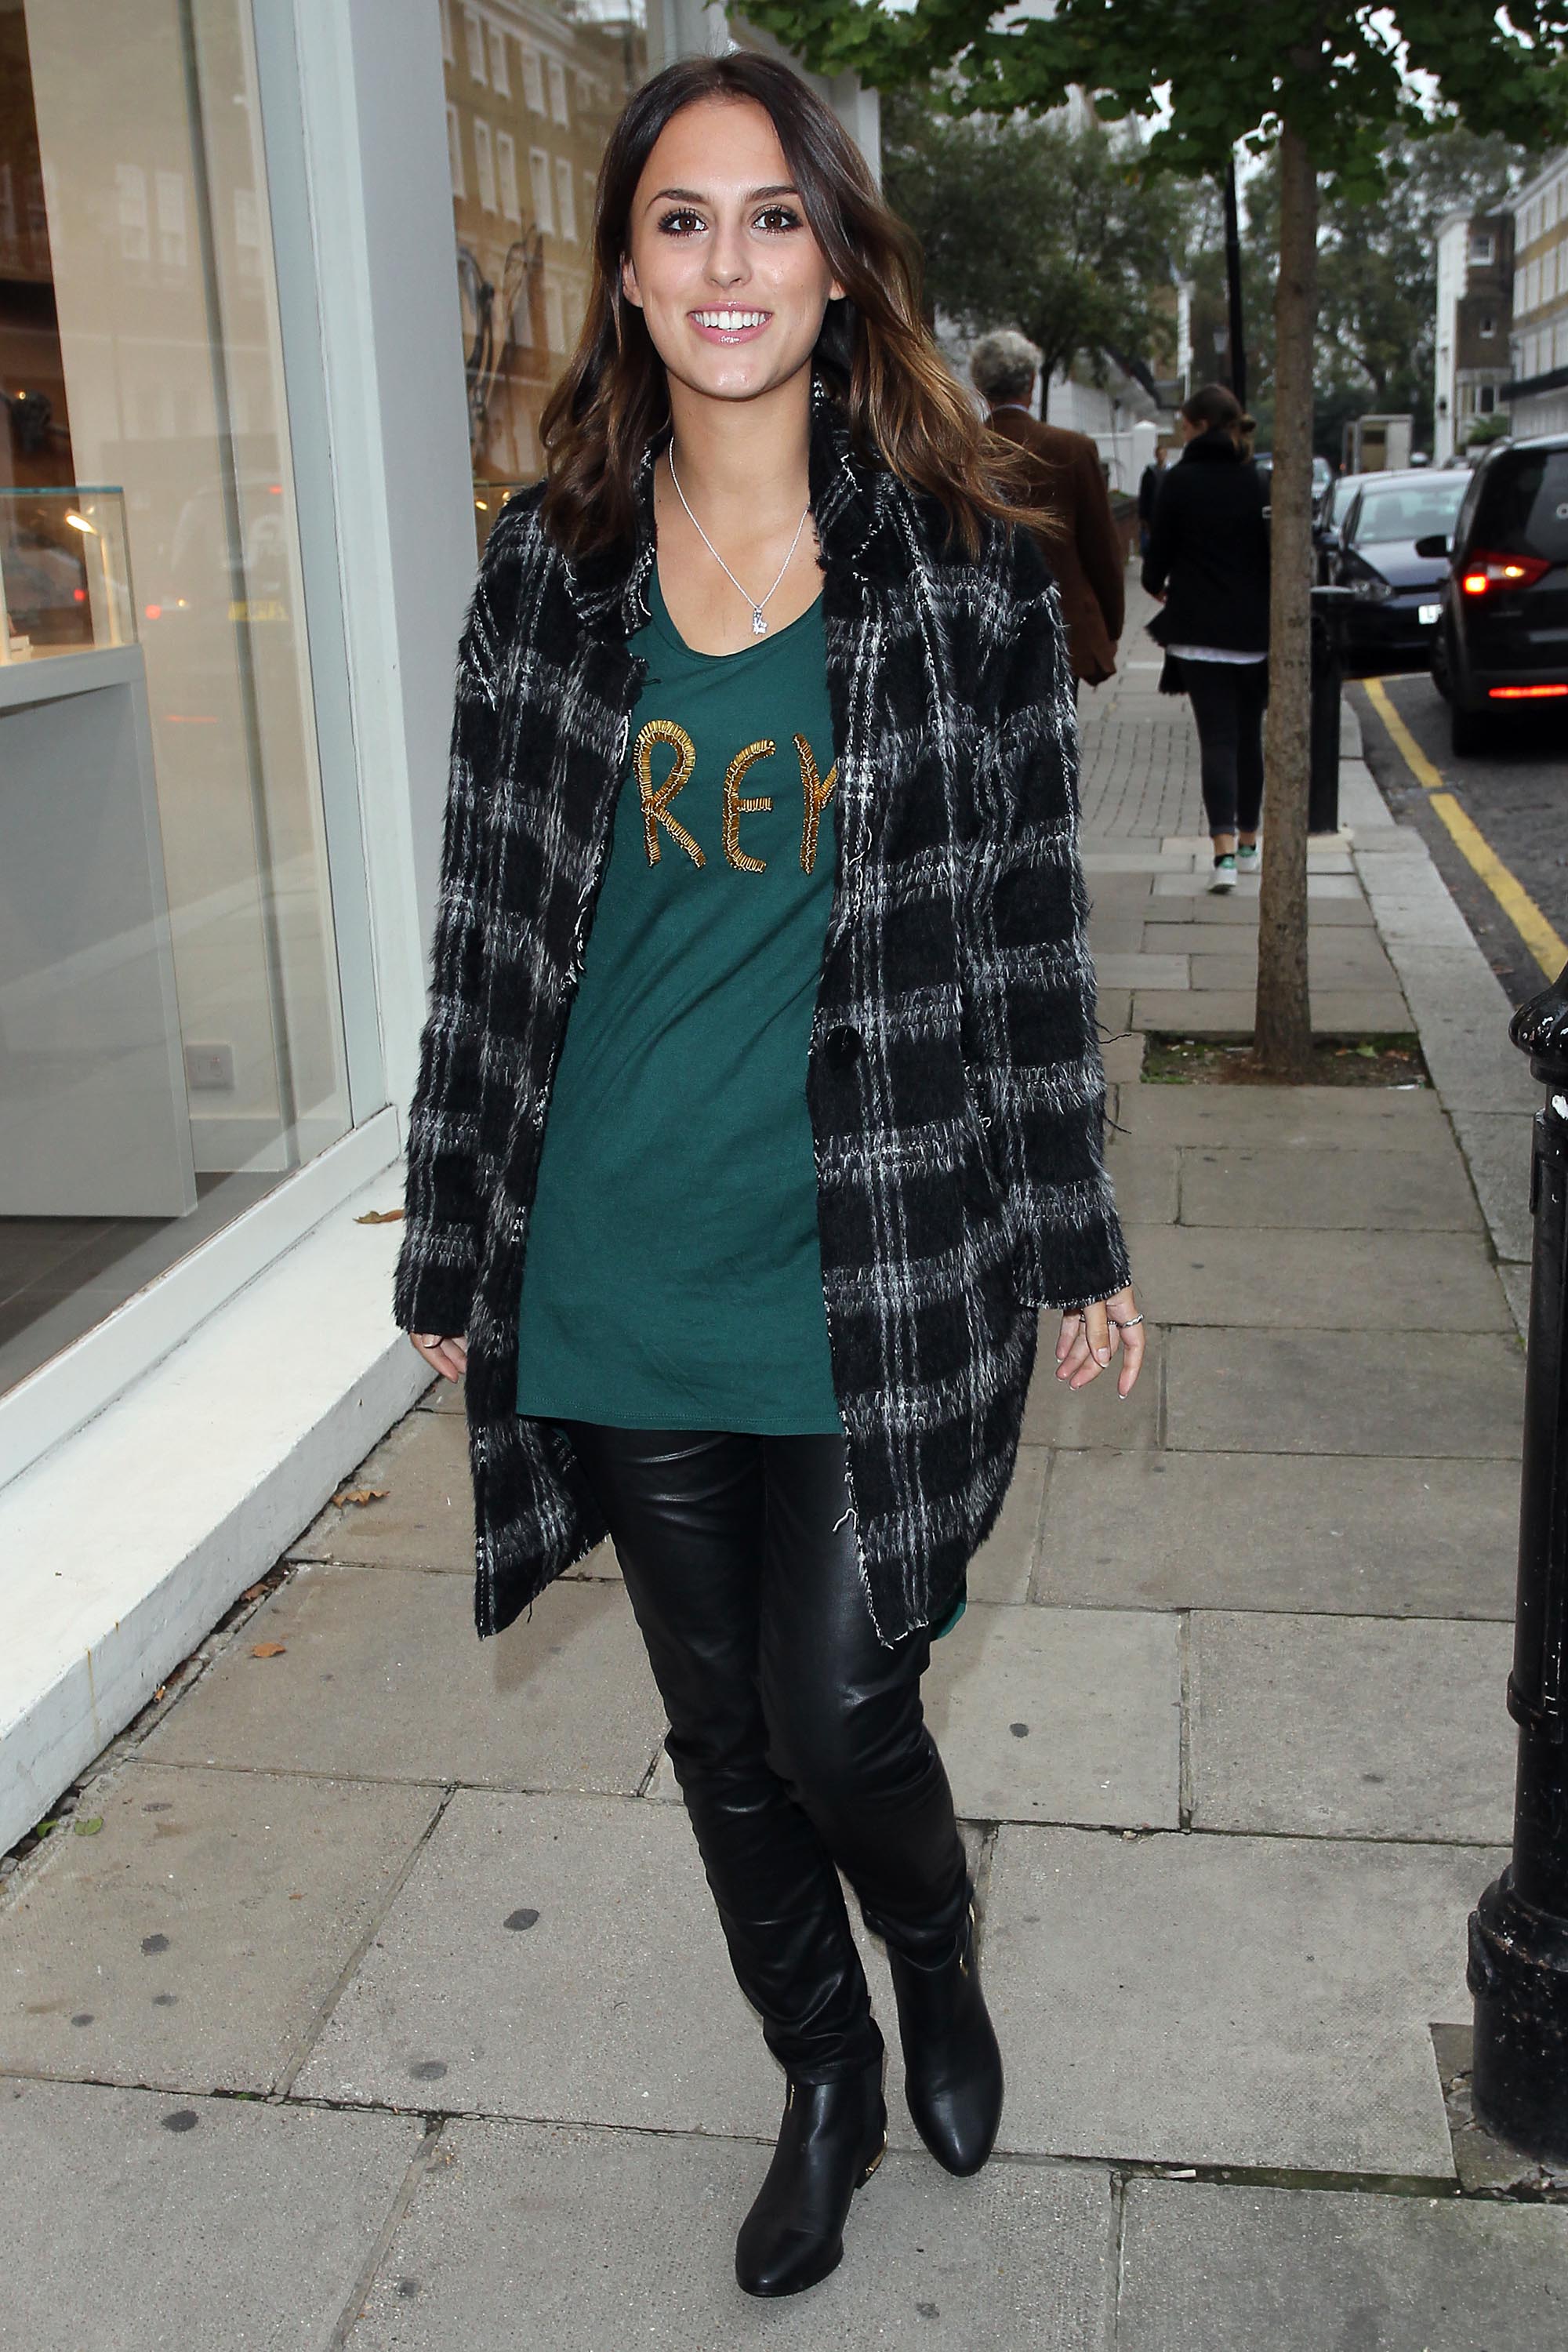 Lucy Watson seen arriving at Pandora Store on King’s Road